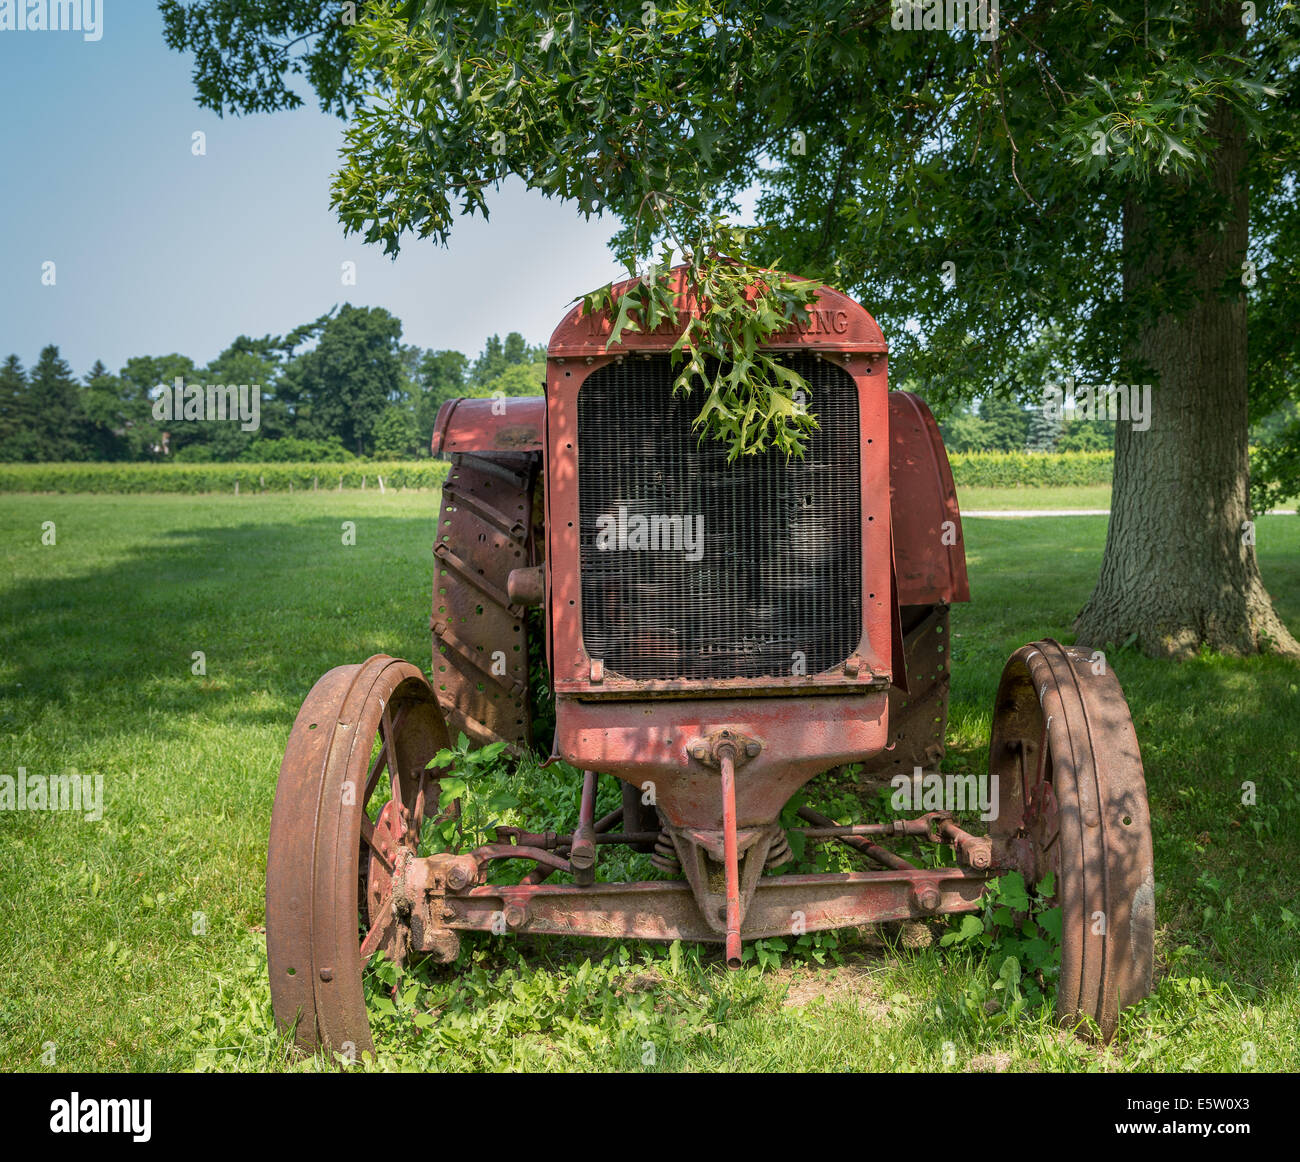 The front view of a McCormick Deering tractor. Stock Photo